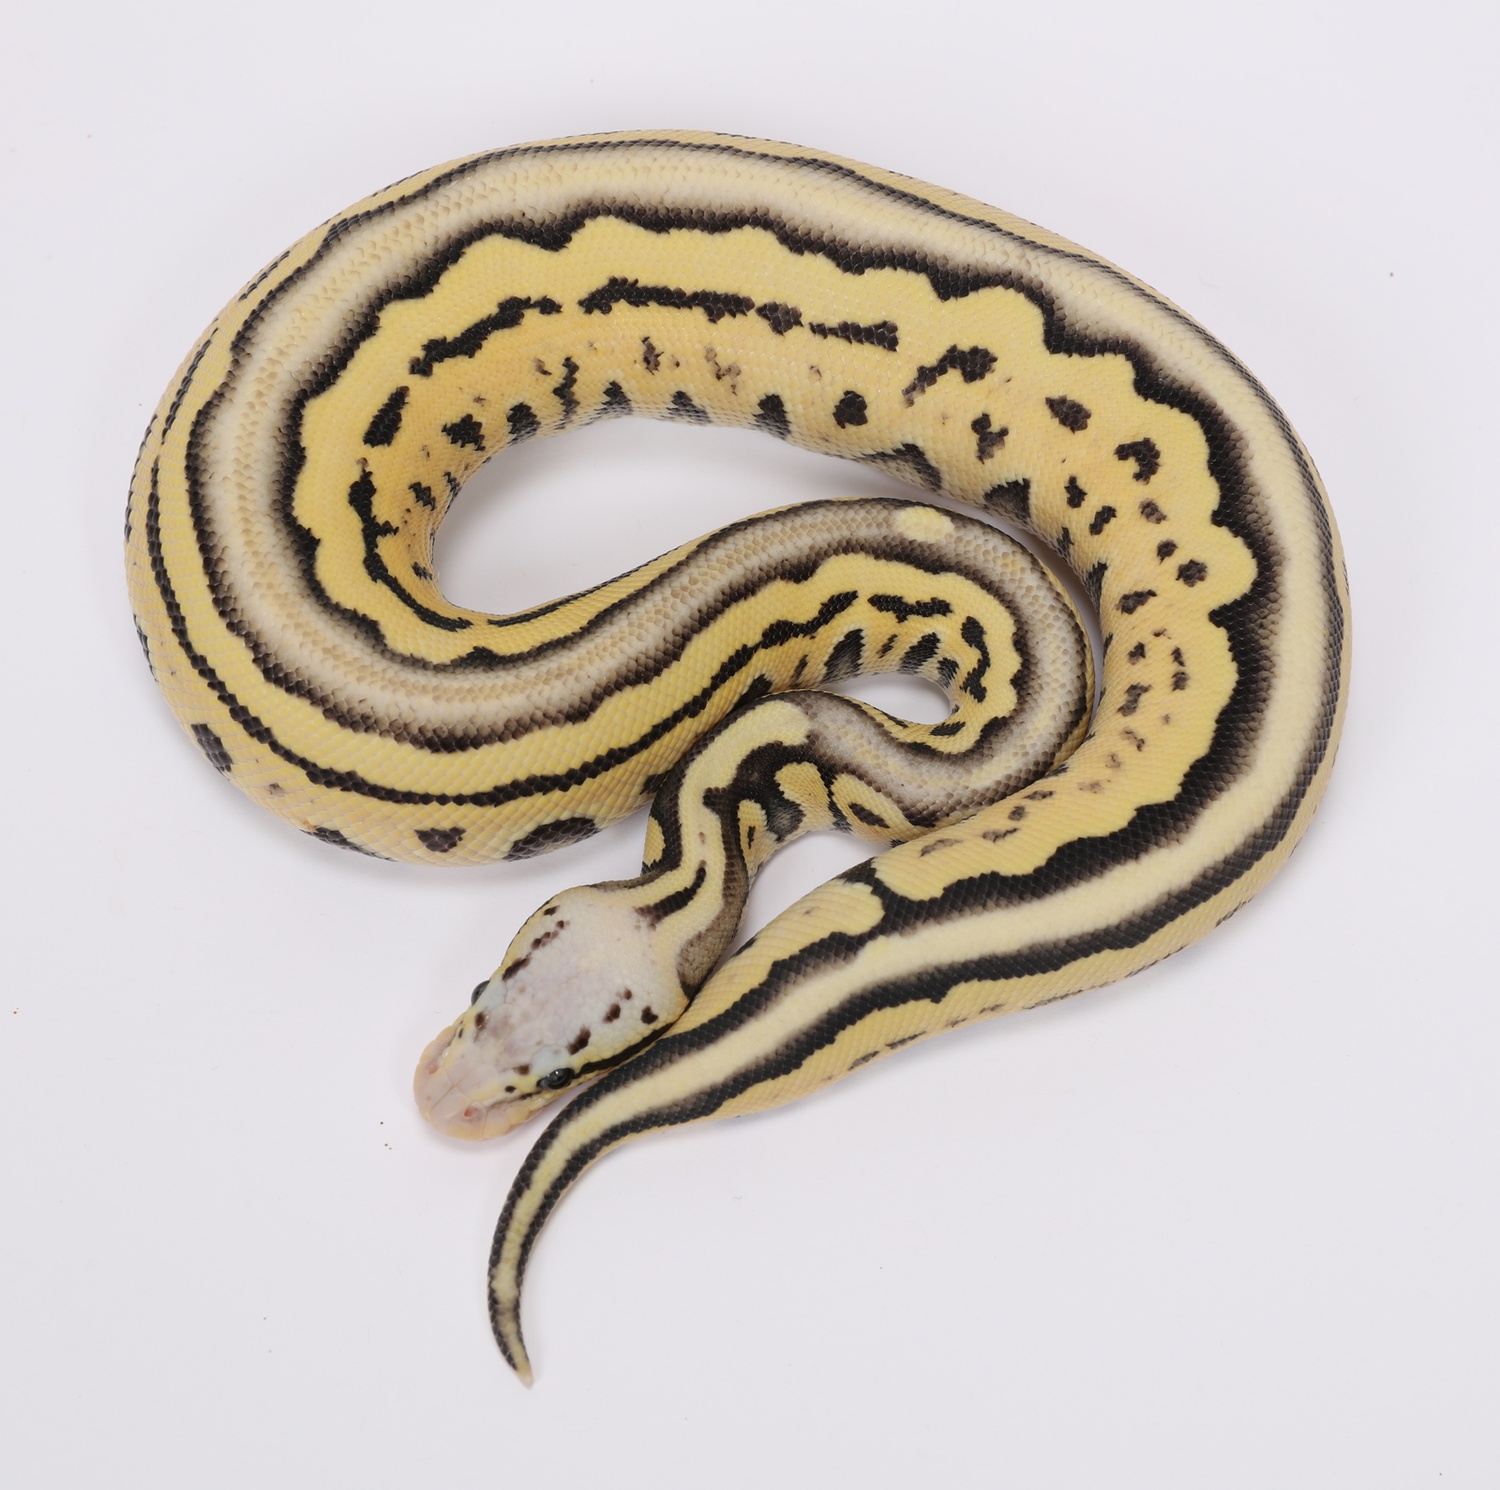 Tri Stripe Desert Ghost Super Pastel Possible Enchi Ball Python by Sterling Nelson